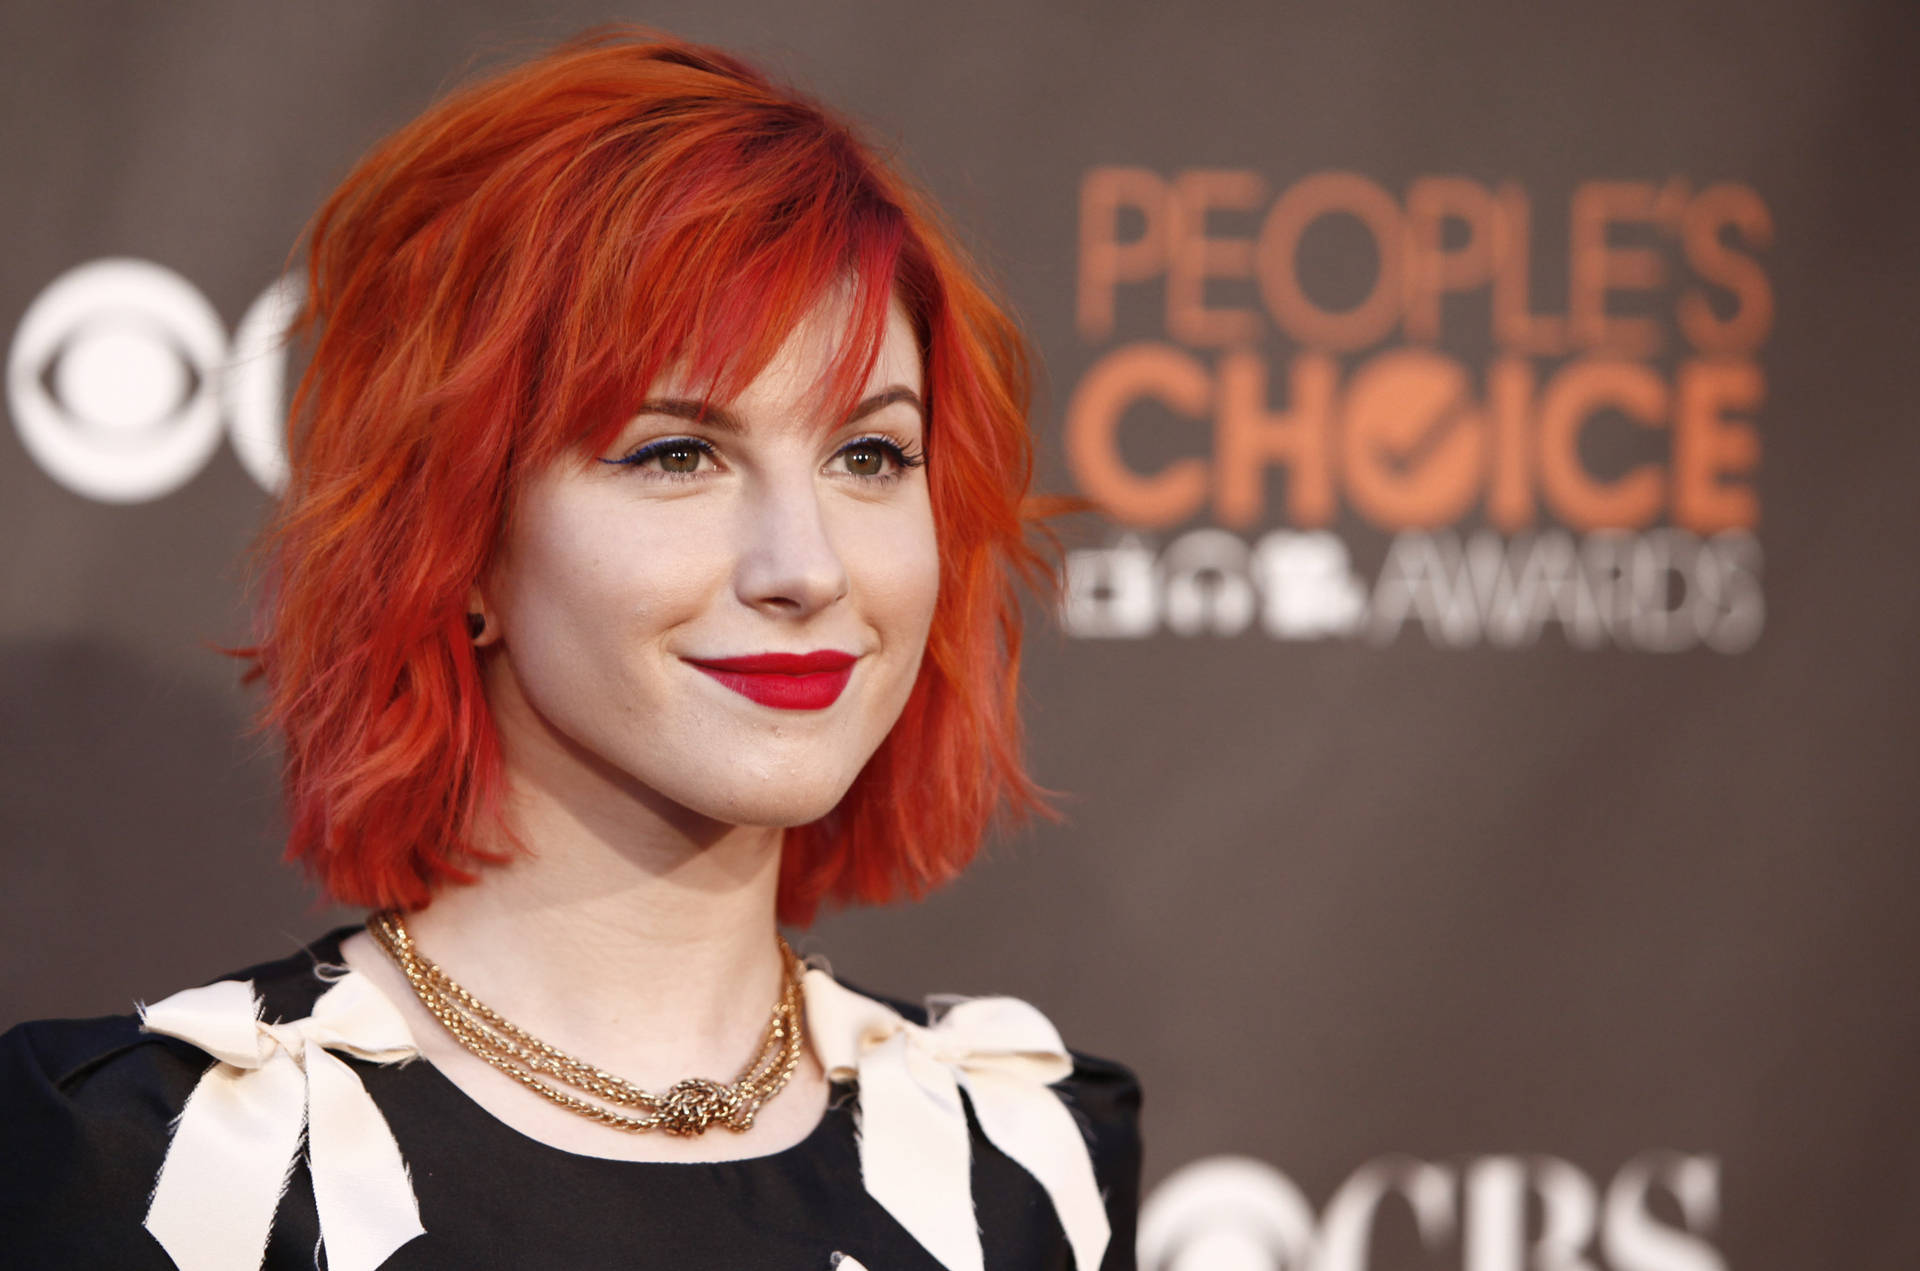 Hayley Williams People's Choice Awards Background